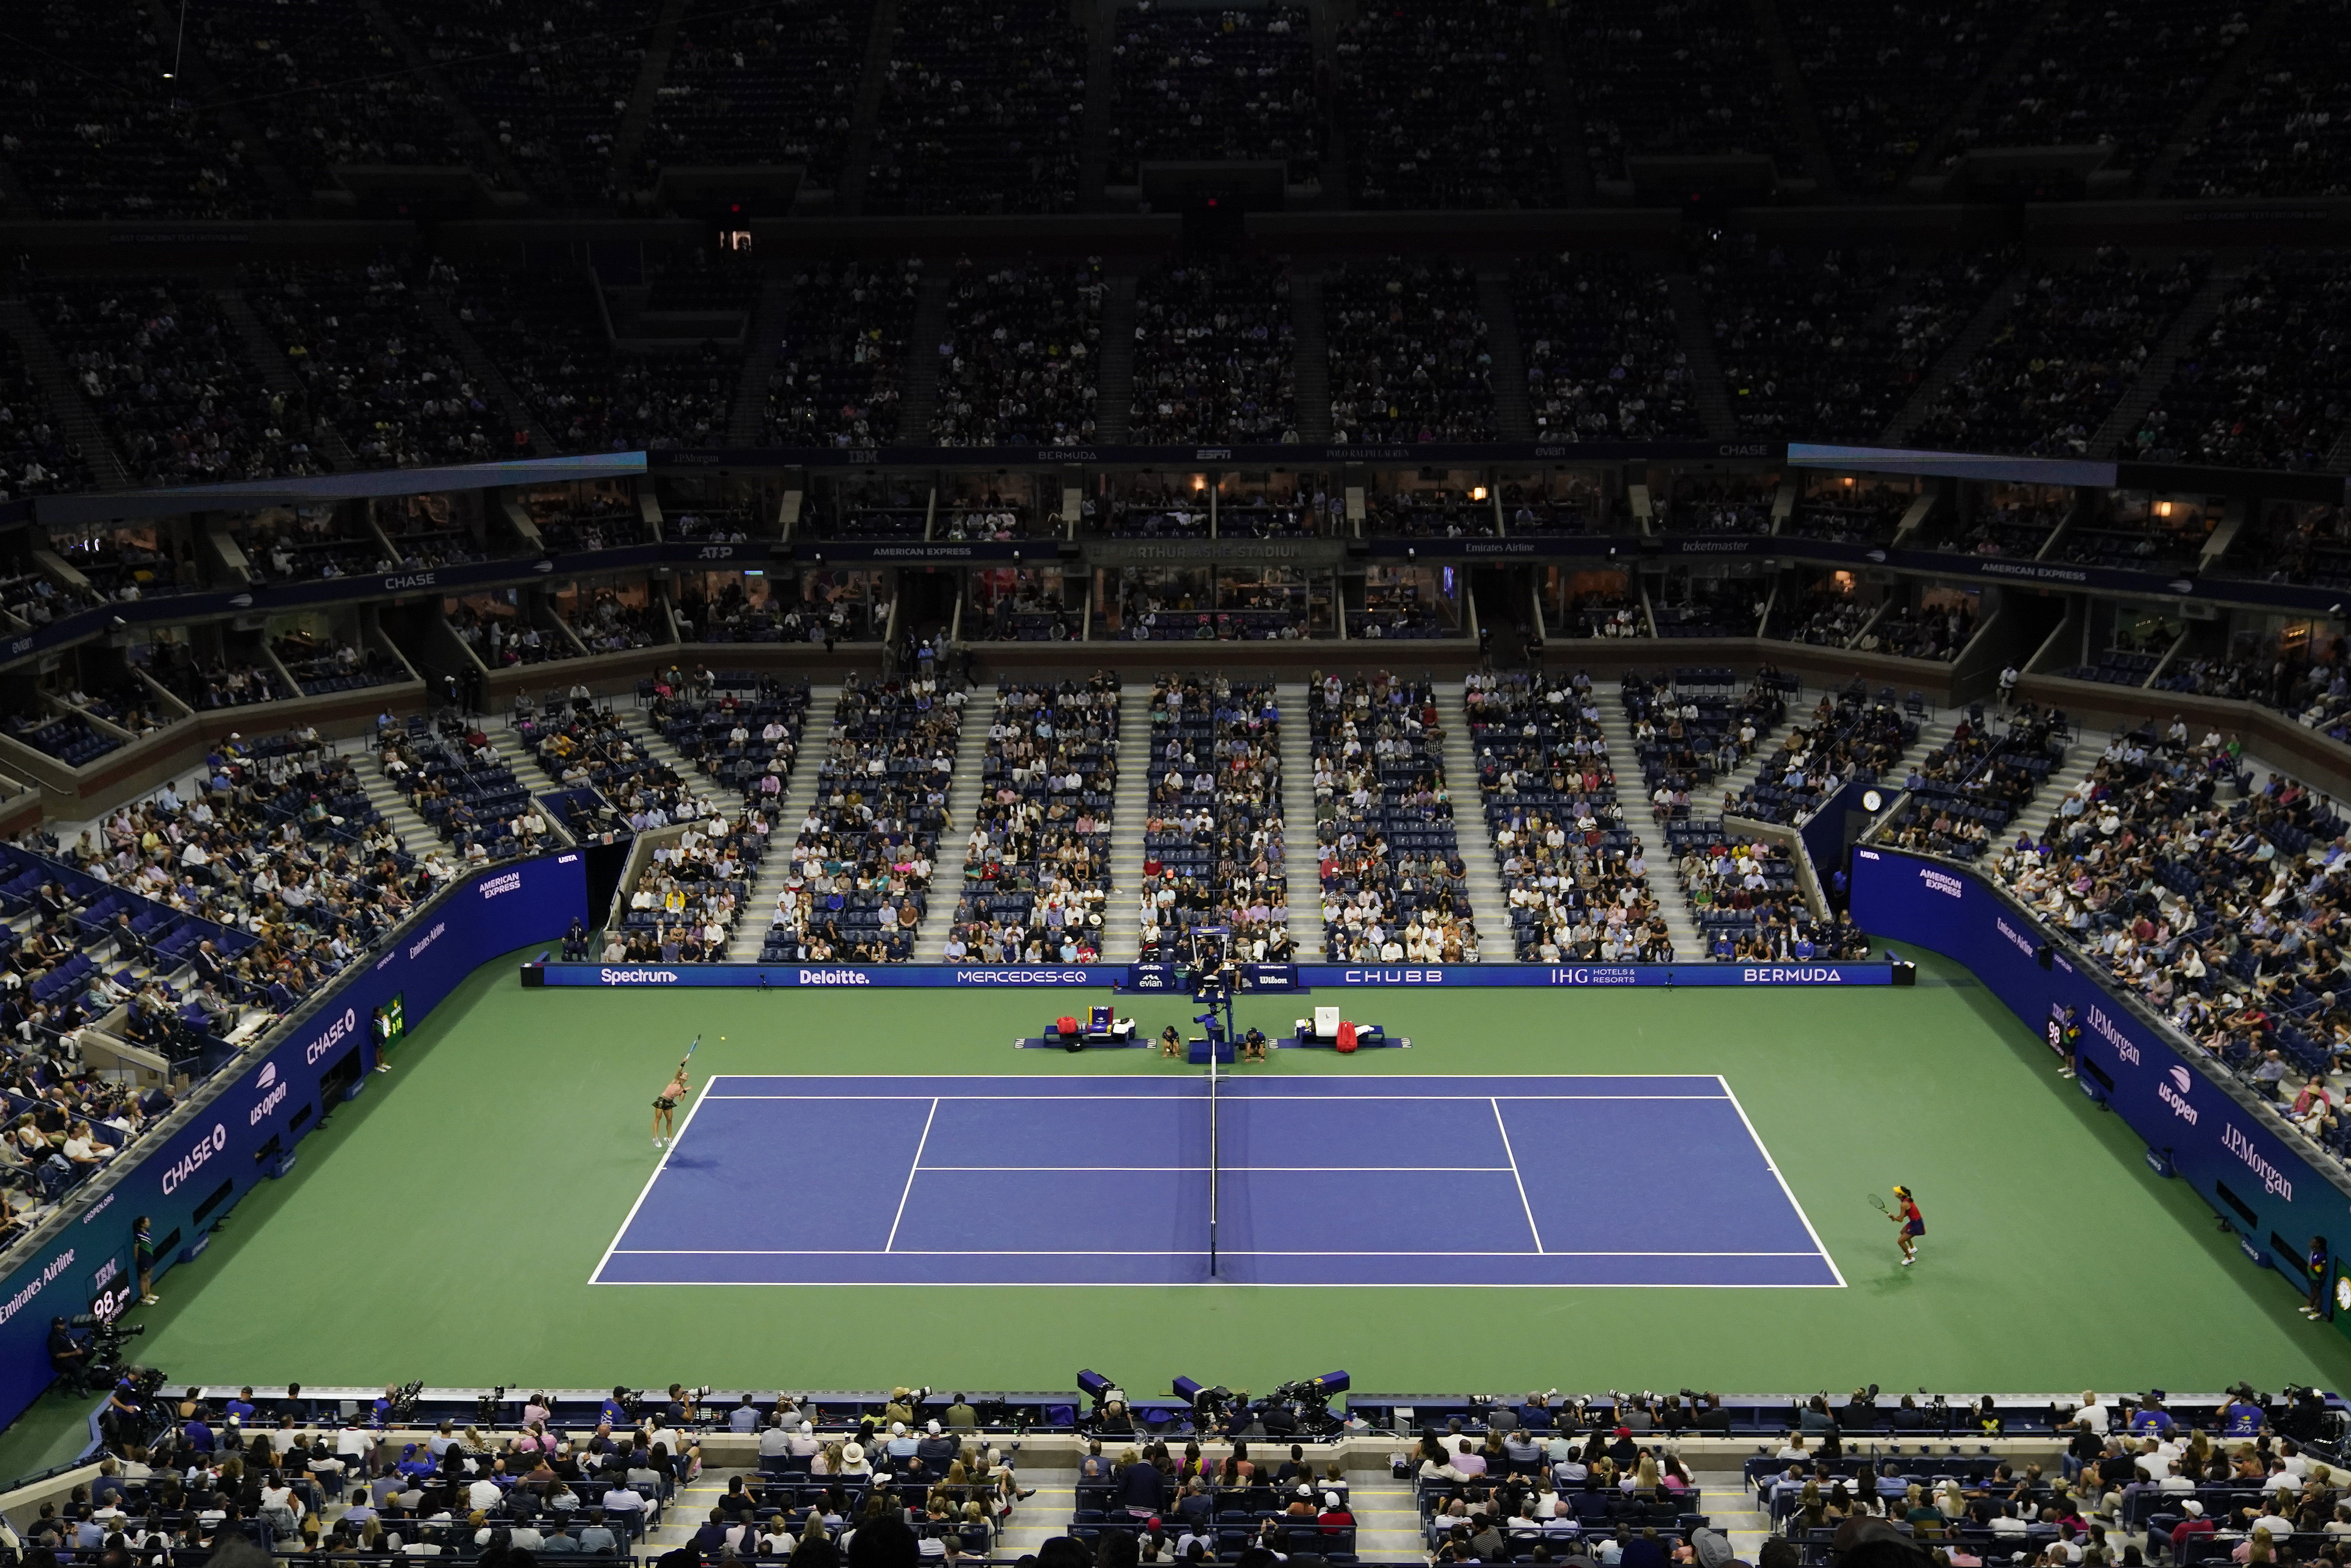 tennis live streaming us open 2021